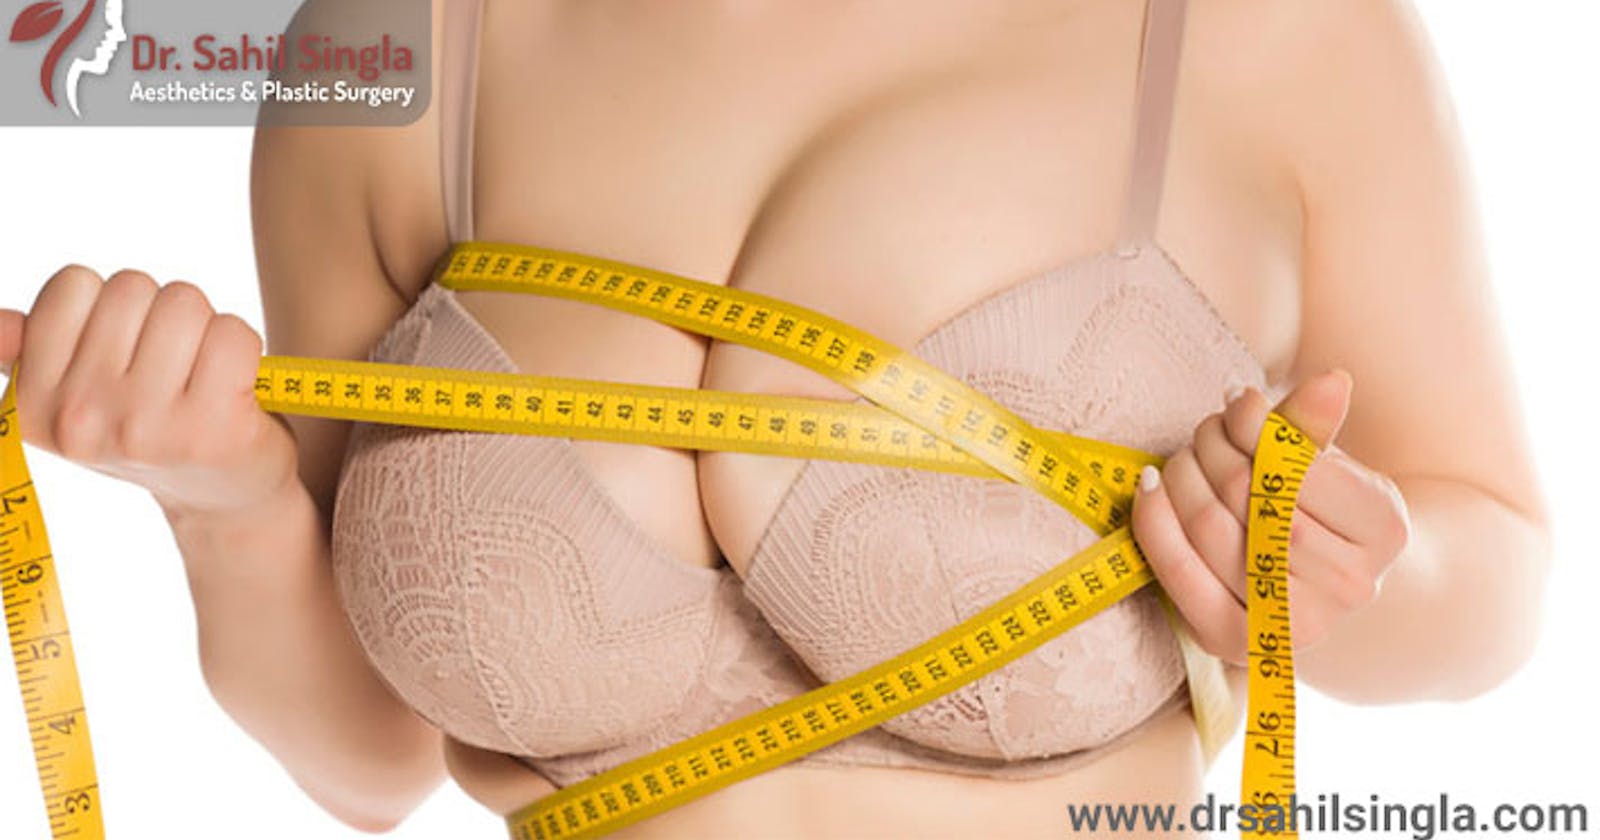 Breast Reduction Surgery - Important Points About the Procedure